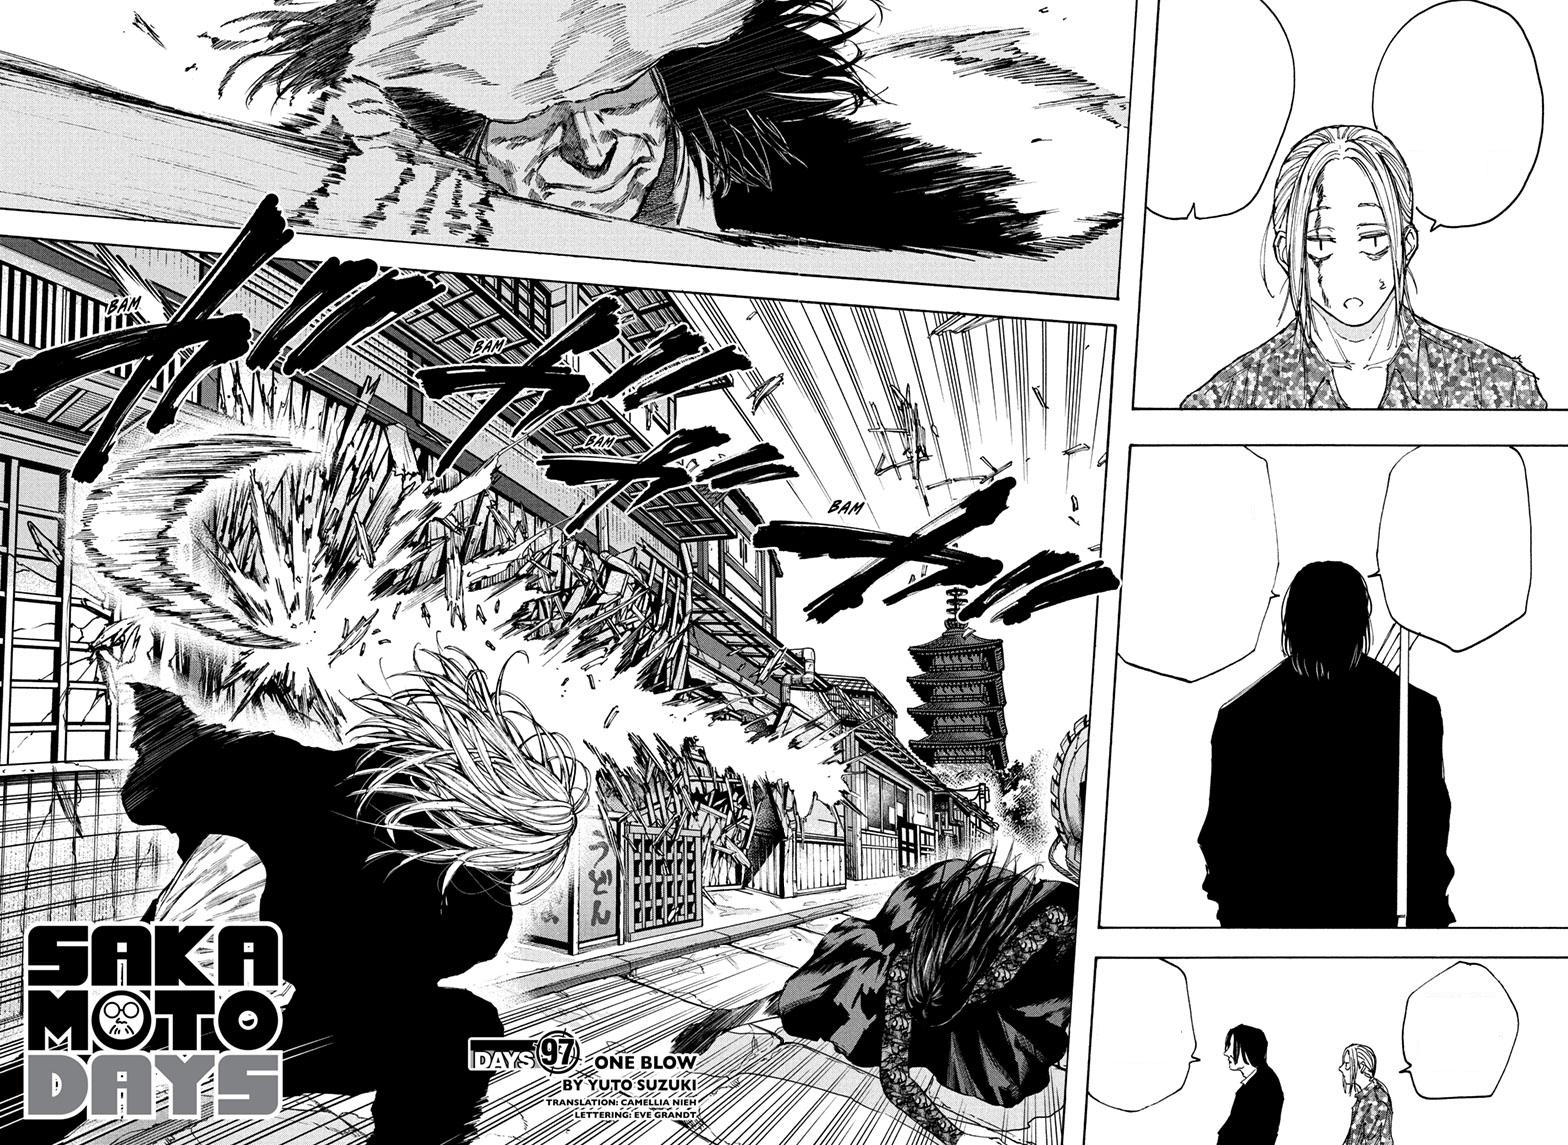 Sakamoto Days Chapter 106 Discussion - Forums 